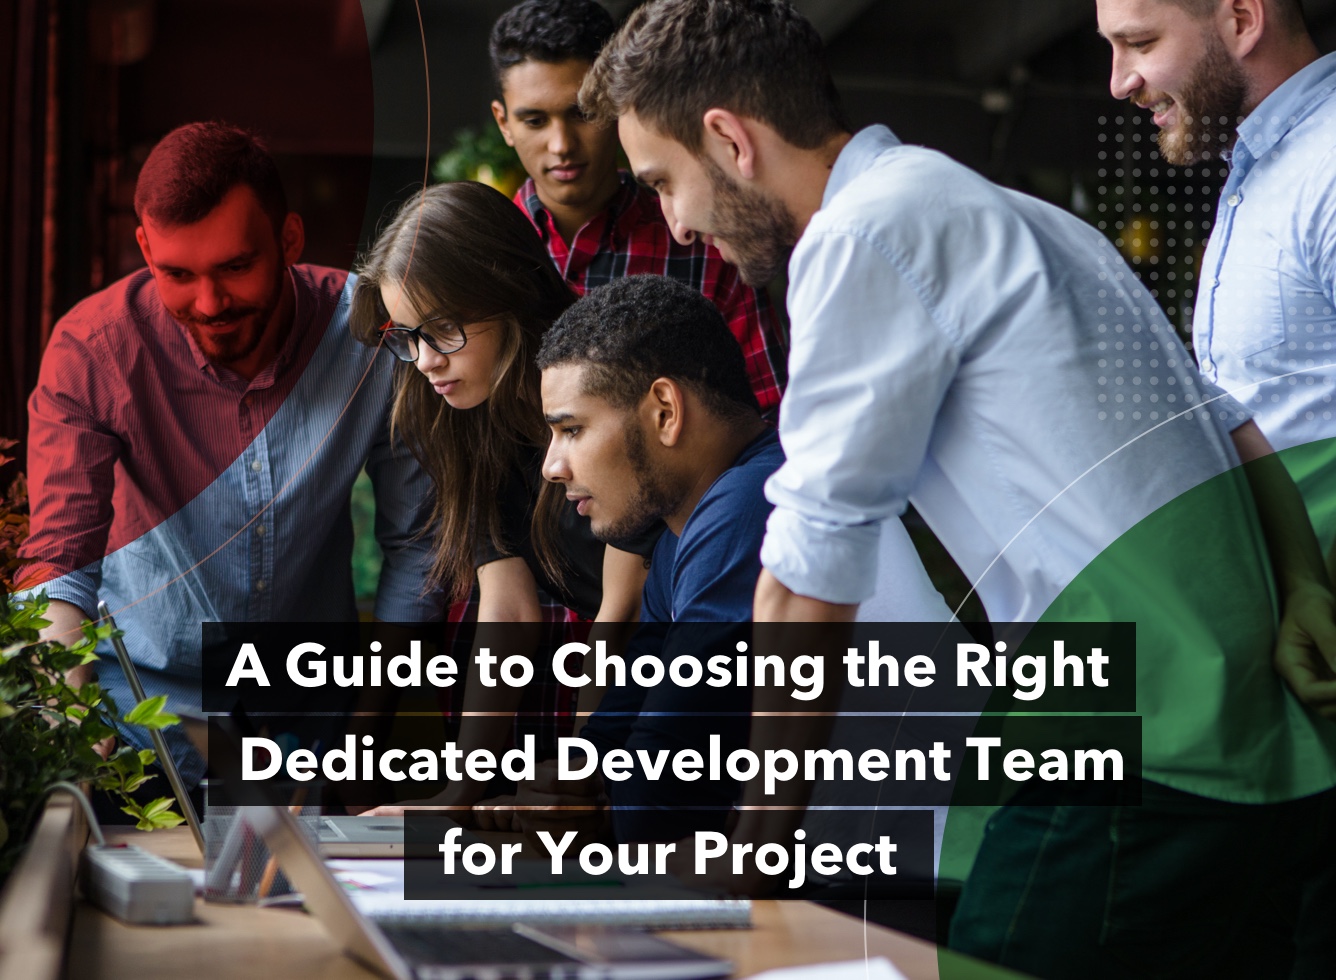 A Guide to Choosing the Right Dedicated Development Team for Your Project